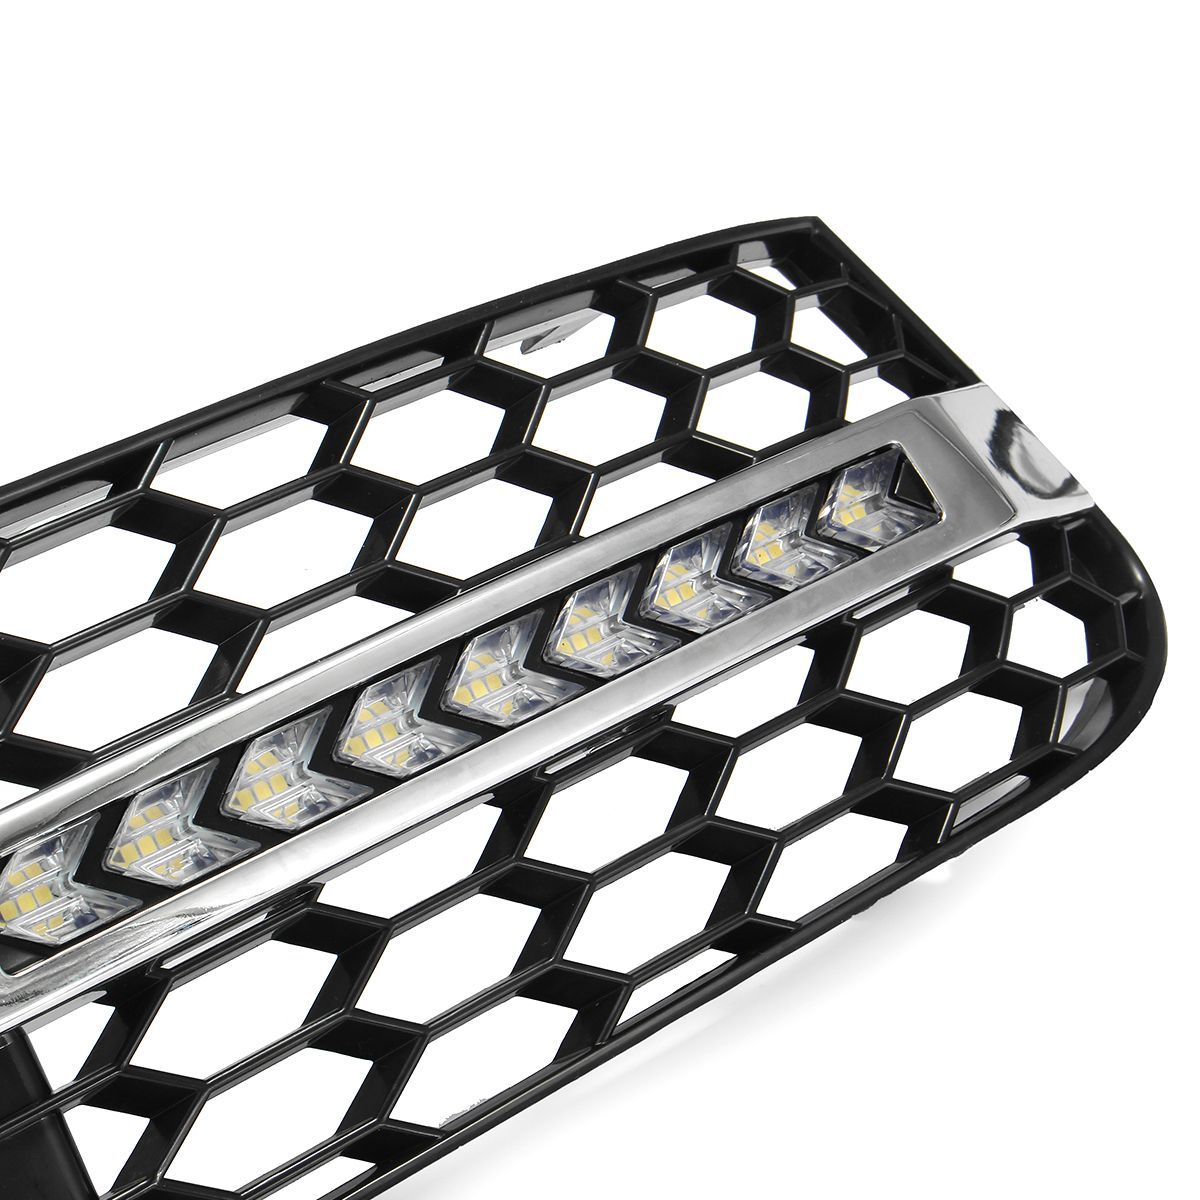 Pair-Honeycomb-Hex-Mesh-Fog-Lights-Cover-Grille-with-Flowing-LED-Turn-Signal-White-DRL-Daytime-Runni-1630538